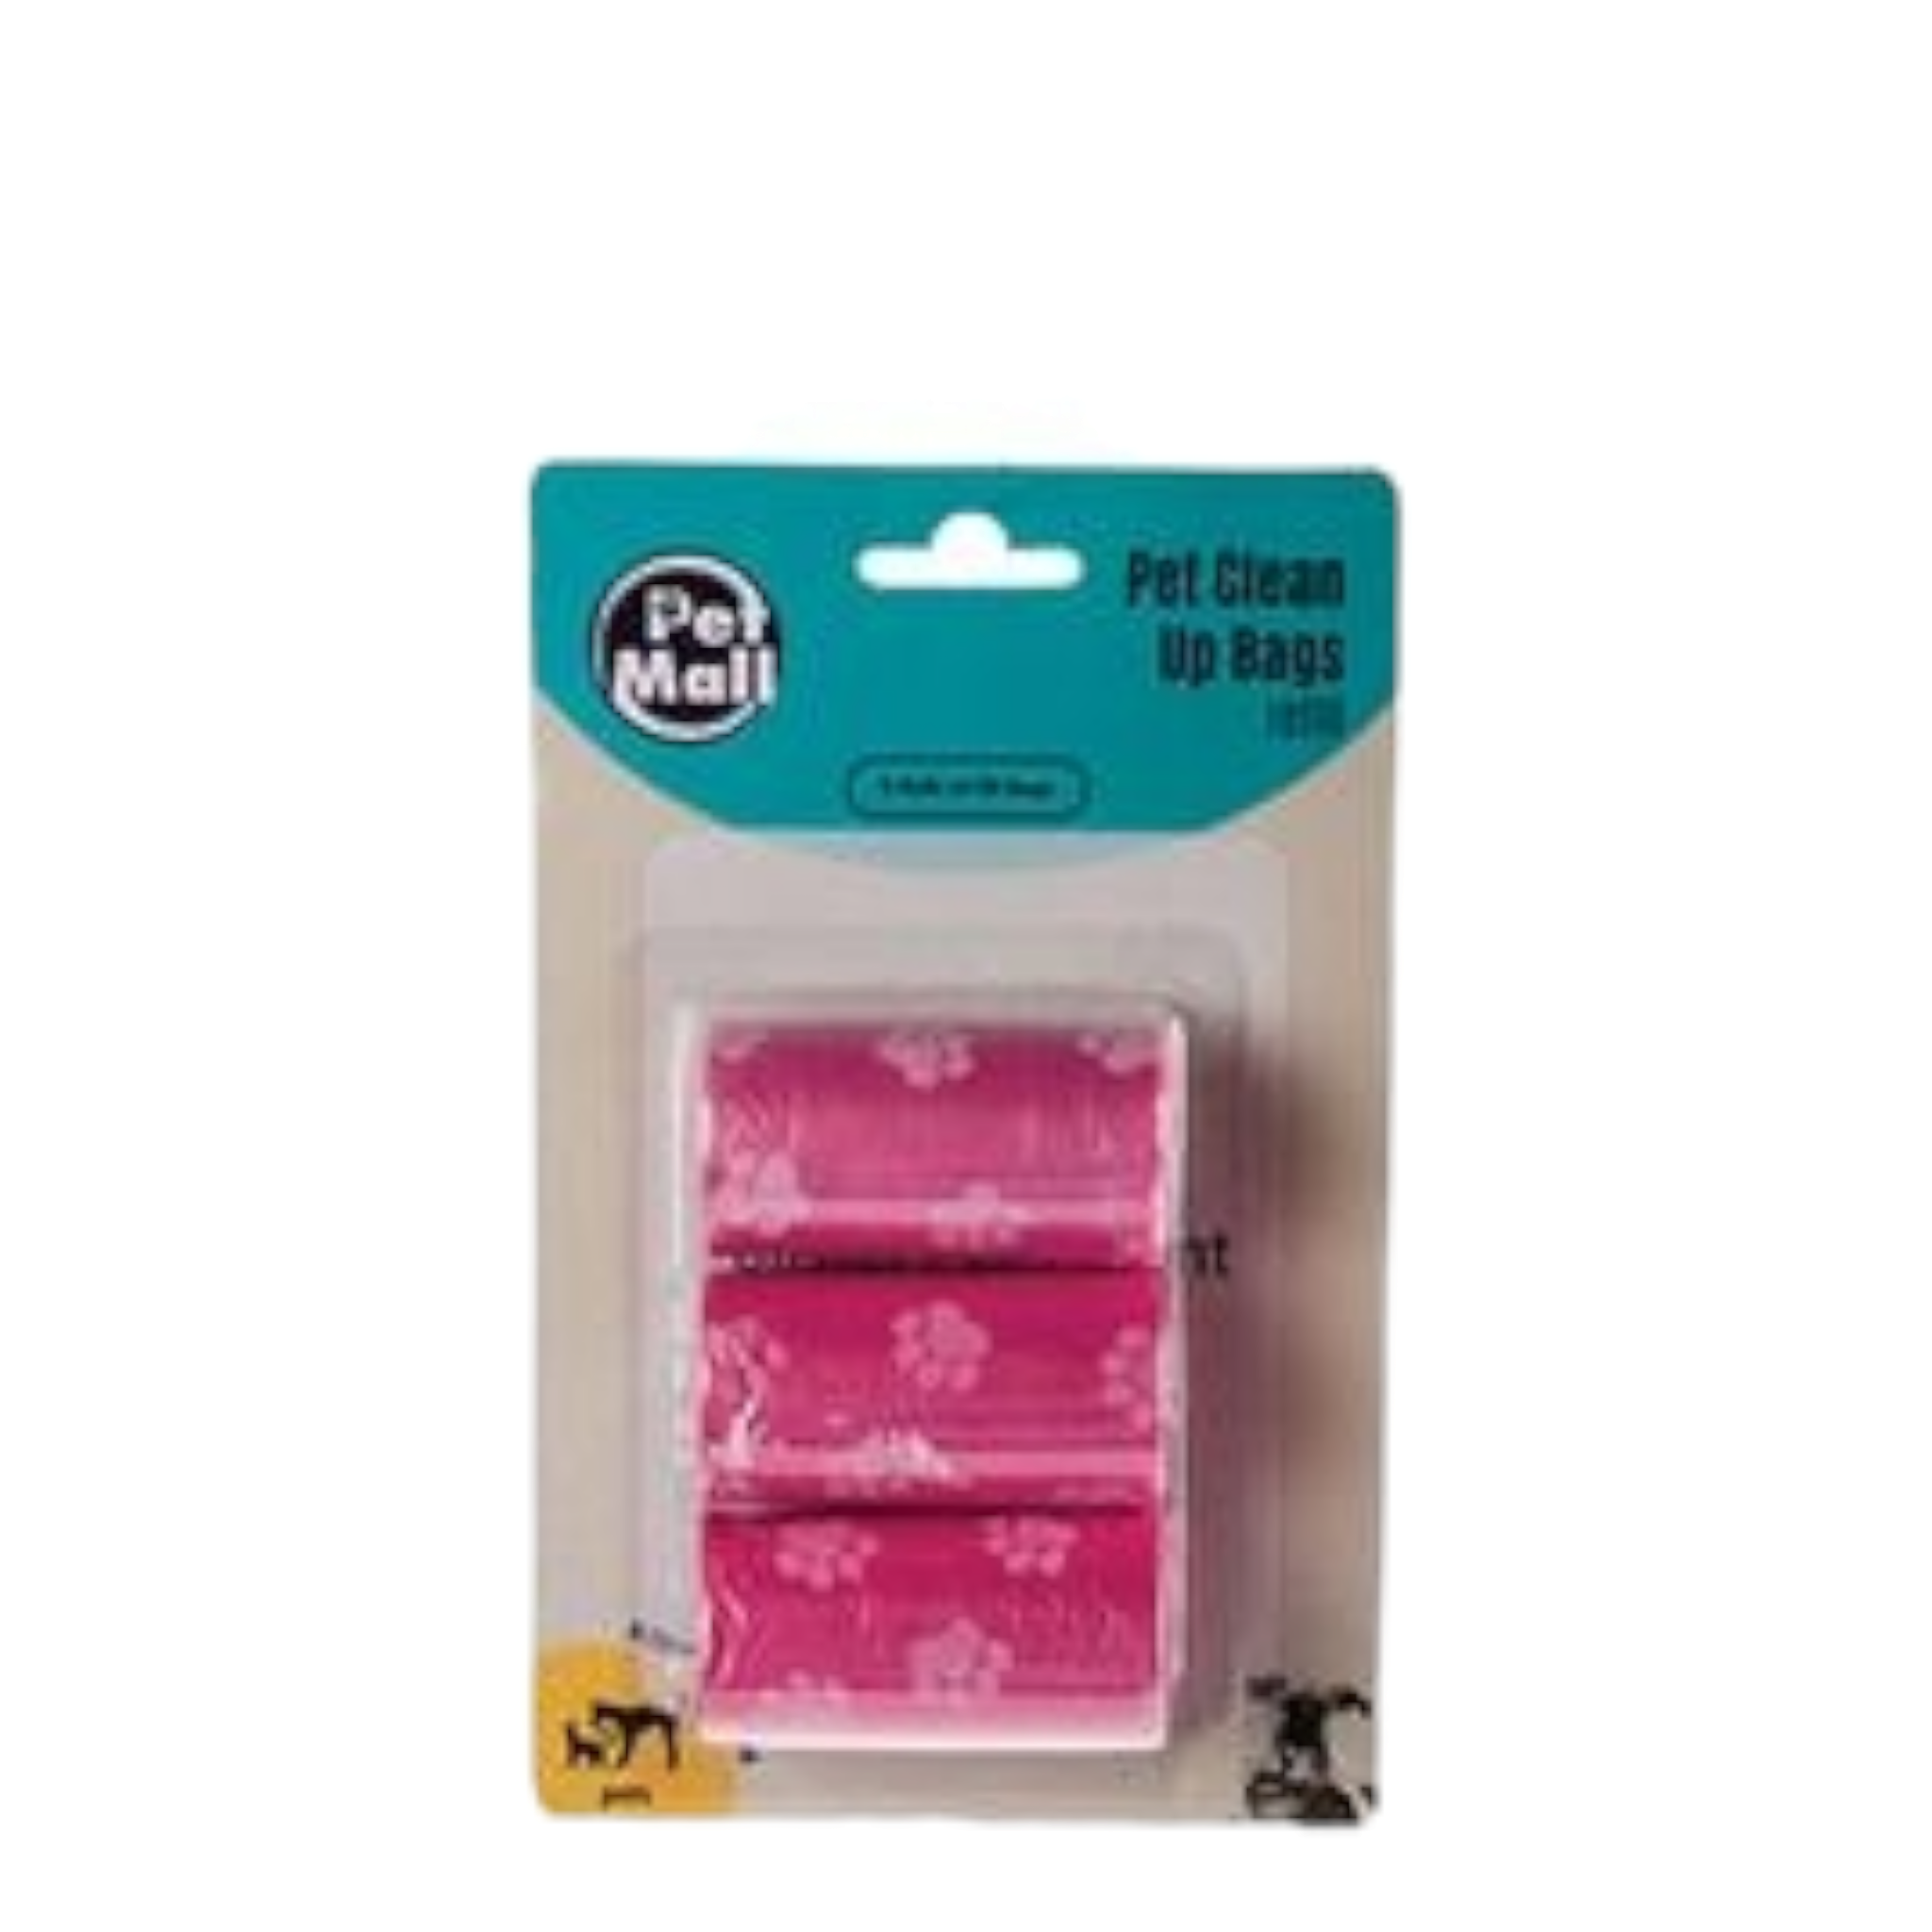 Pet Mall Dog Clean Up Bags Refill 3x20Pack each